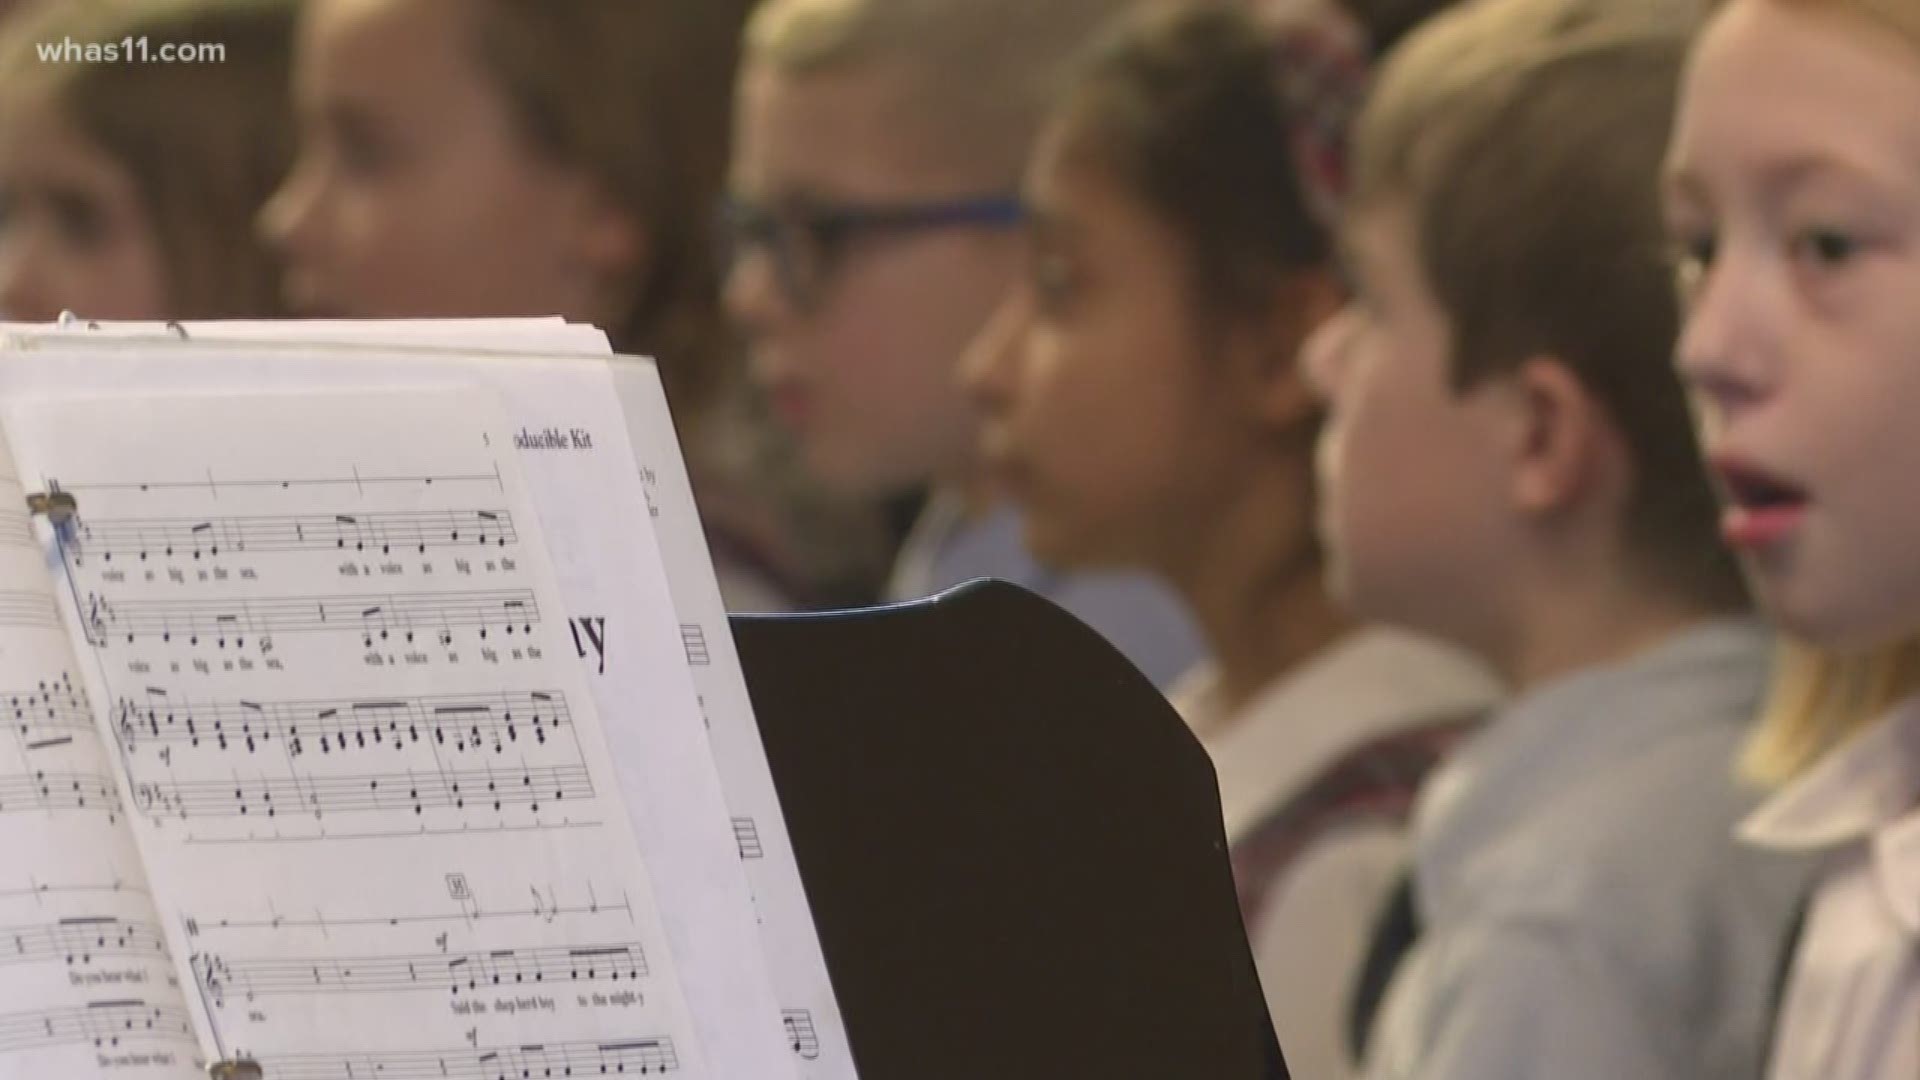 Spreading joy is one of the big stories to talk about when it comes to the holiday season, elementary school kids sang a few Christmas carols.